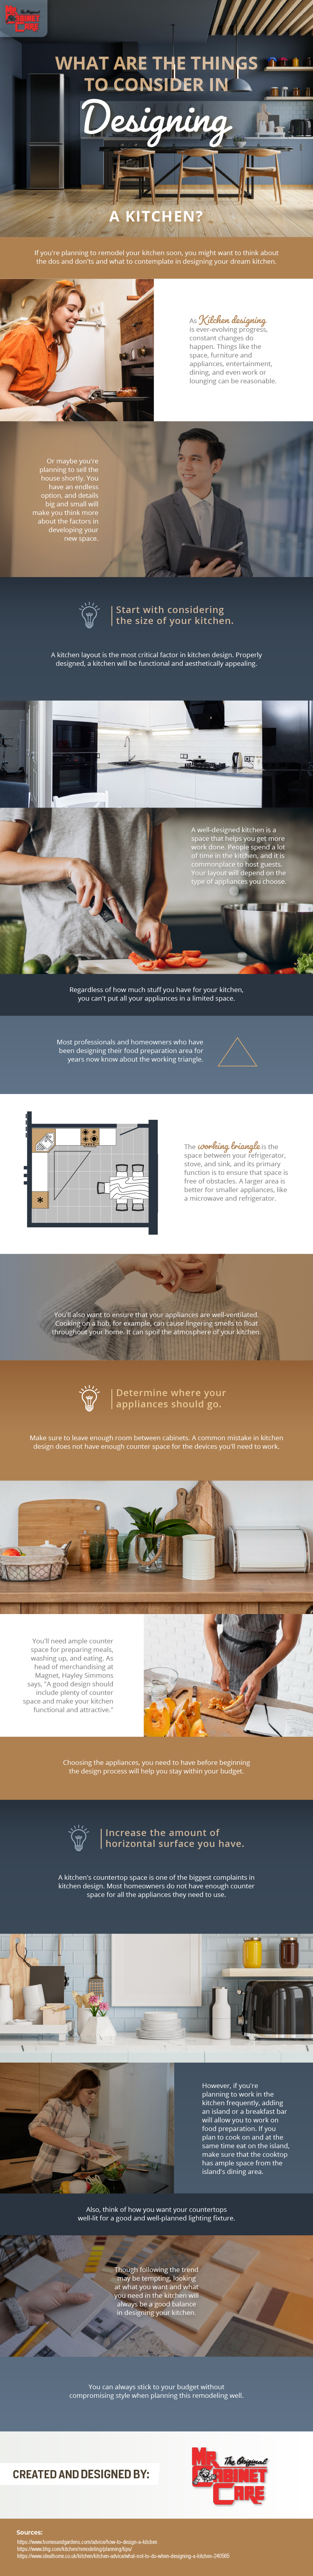 What_Are_the_Things_to_Consider_in_Designing_a_Kitchen_infographic_image